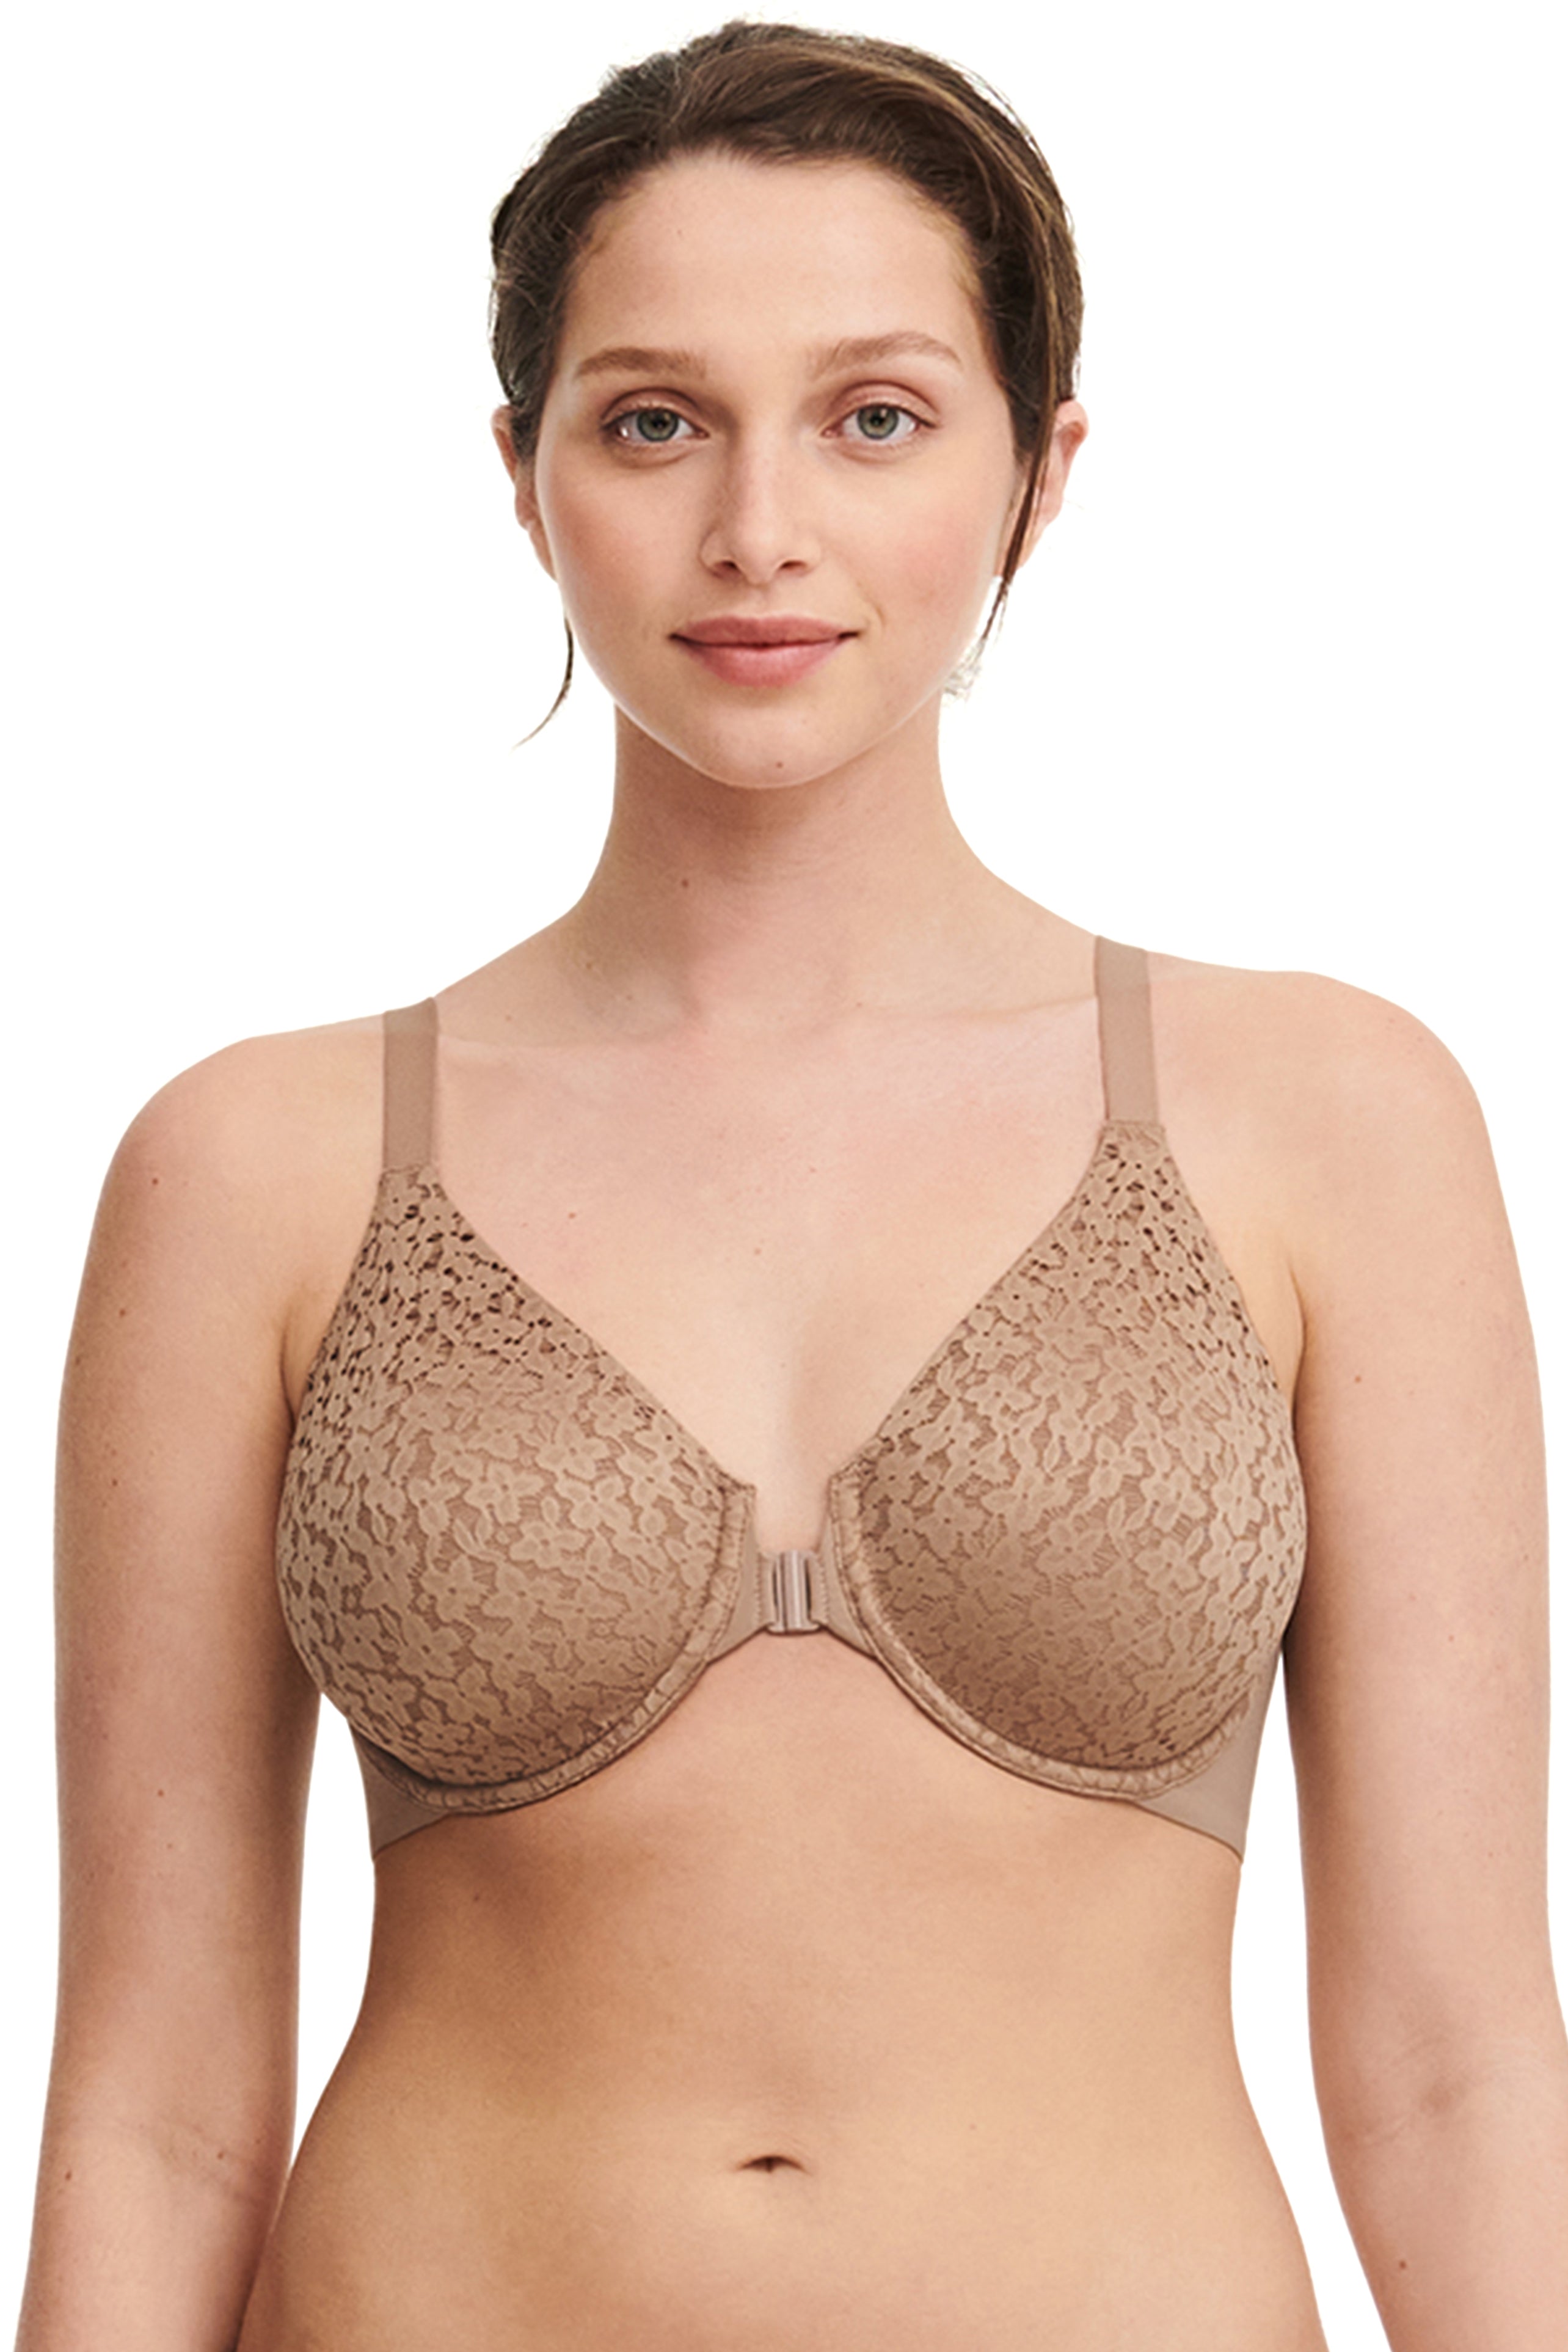 Xysaqa Women's Front-Closure Lift & Support Wireless Bra, Comfy Push Up  Full-Coverage Bra, Classic Vintage Wirefree Bras for Everyday Wear